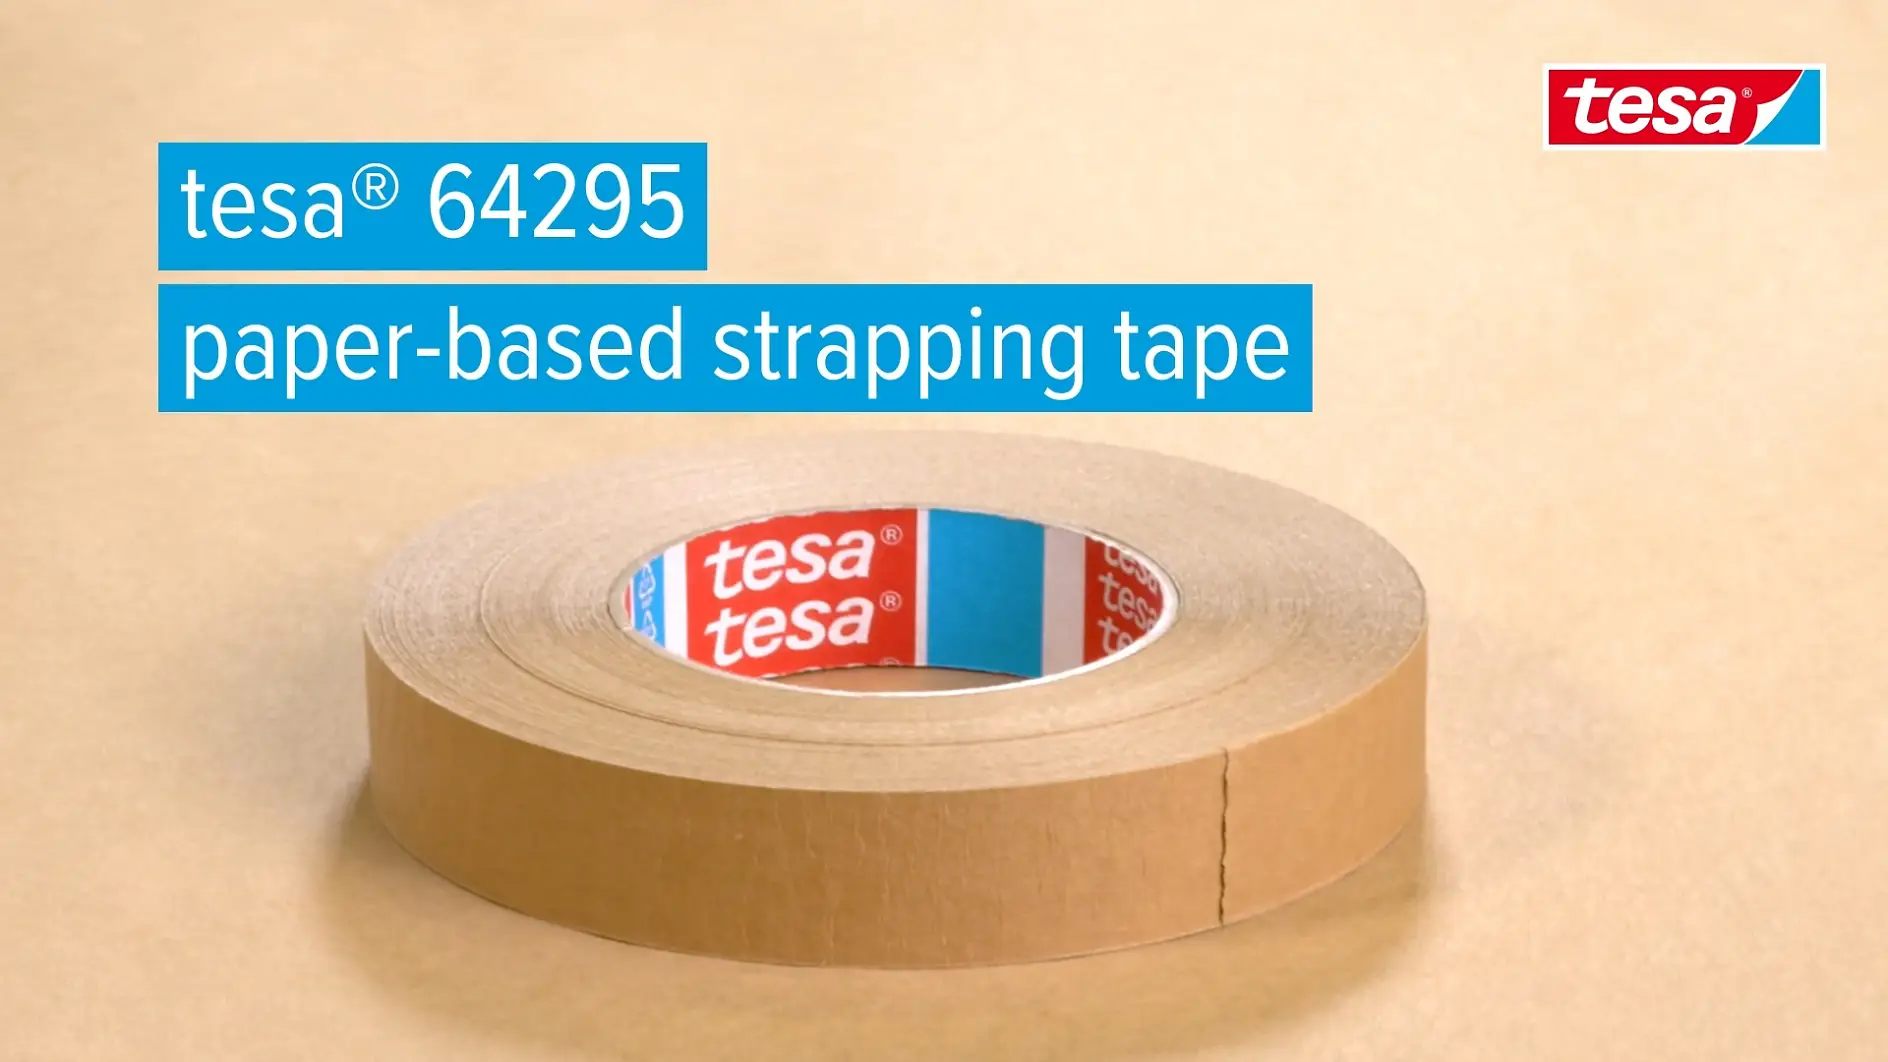 Appliance tesa® 64295 paper strapping tape